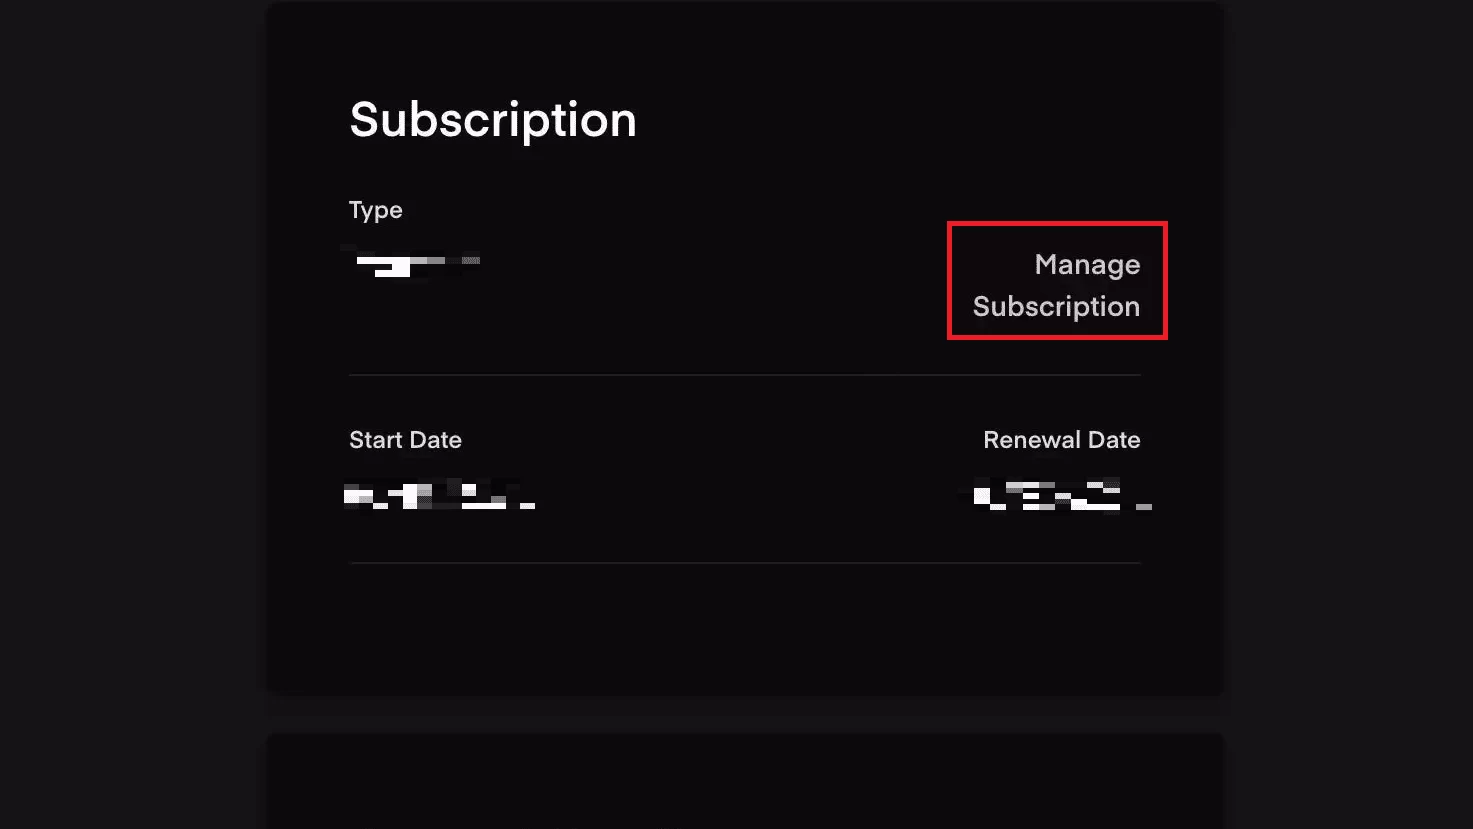 Move to manage subscription option to cancel BET Plus on Roku